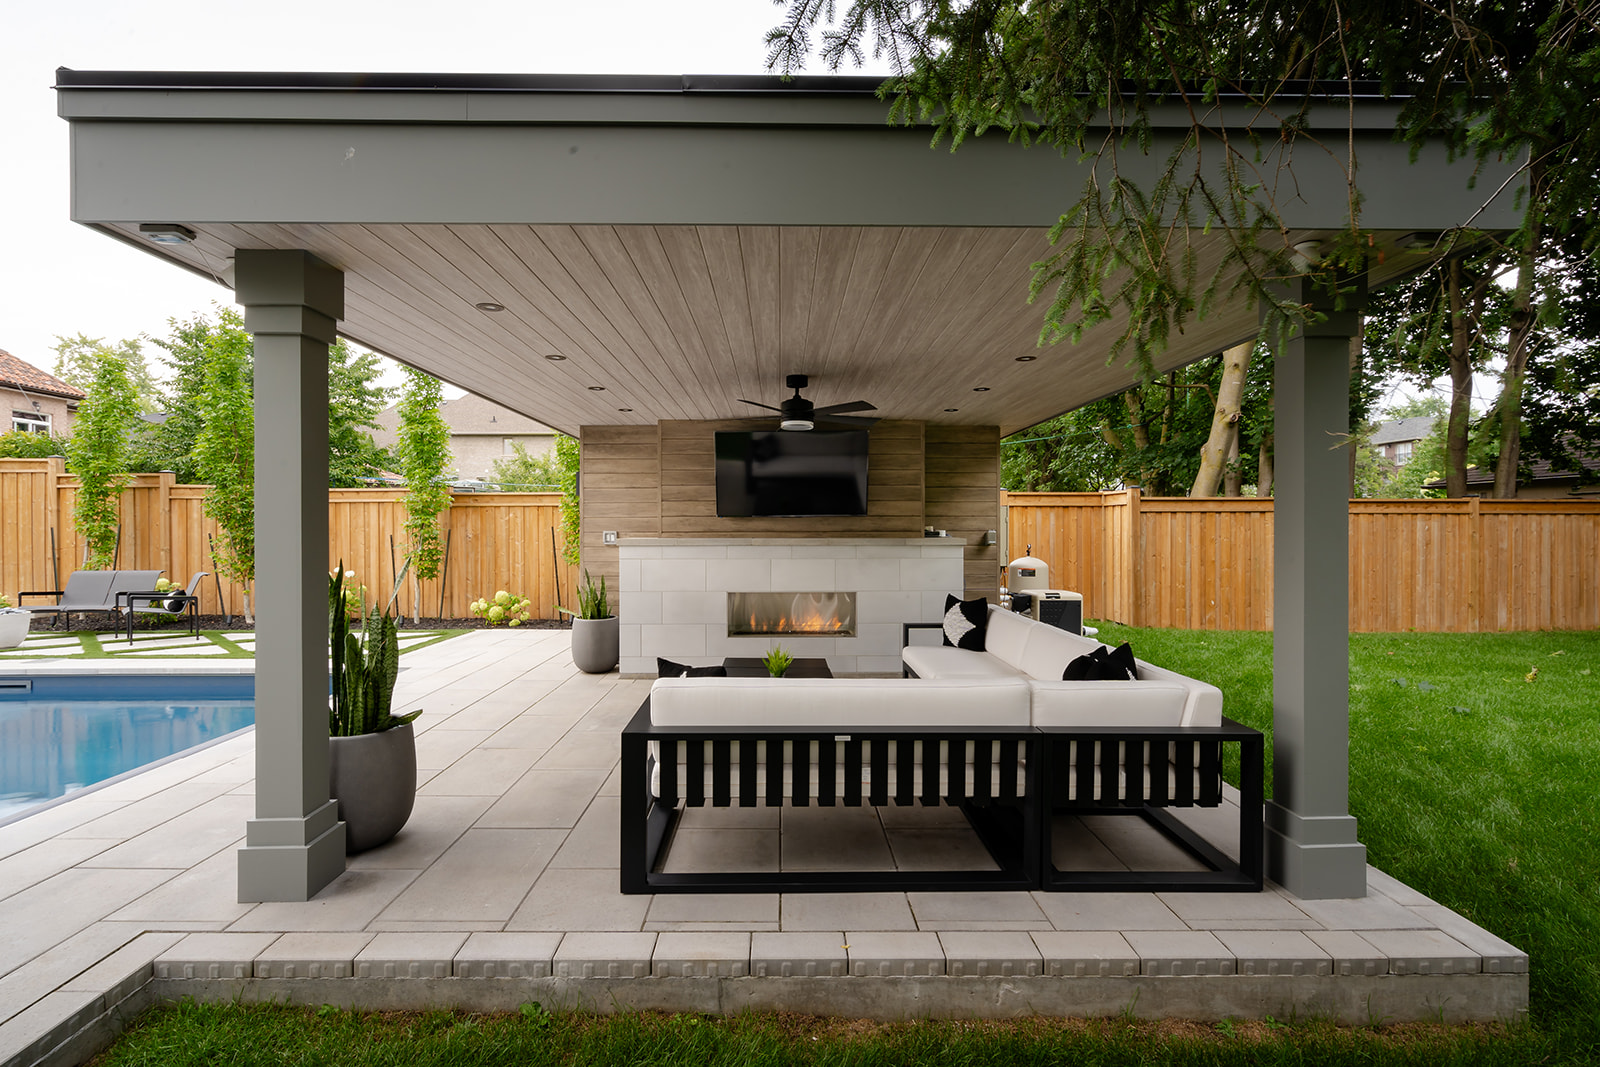 A seating area underneath an awning.